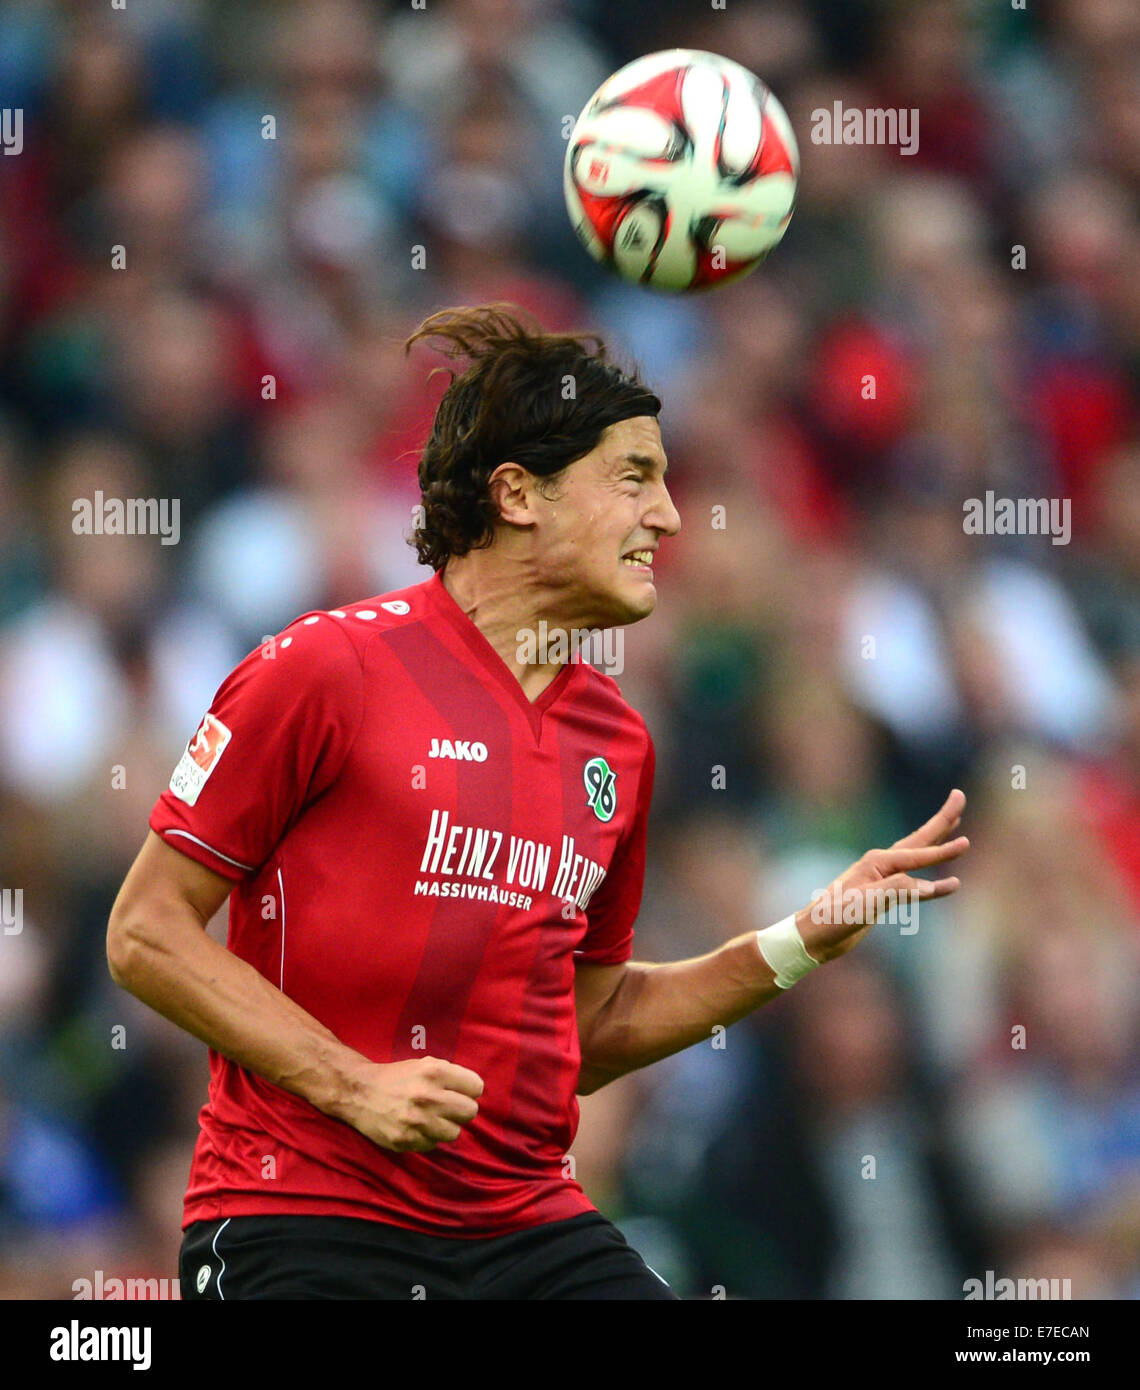 Hanover, Germany. 14th Sep, 2014. Hanover's Miiko Albornoz controls the ball during the Bundesliga soccer match between Hannover 96 and Hamburger SV in Hanover, Germany, 14 September 2014. Photo: Peter Steffen/dpa/Alamy Live News Stock Photo